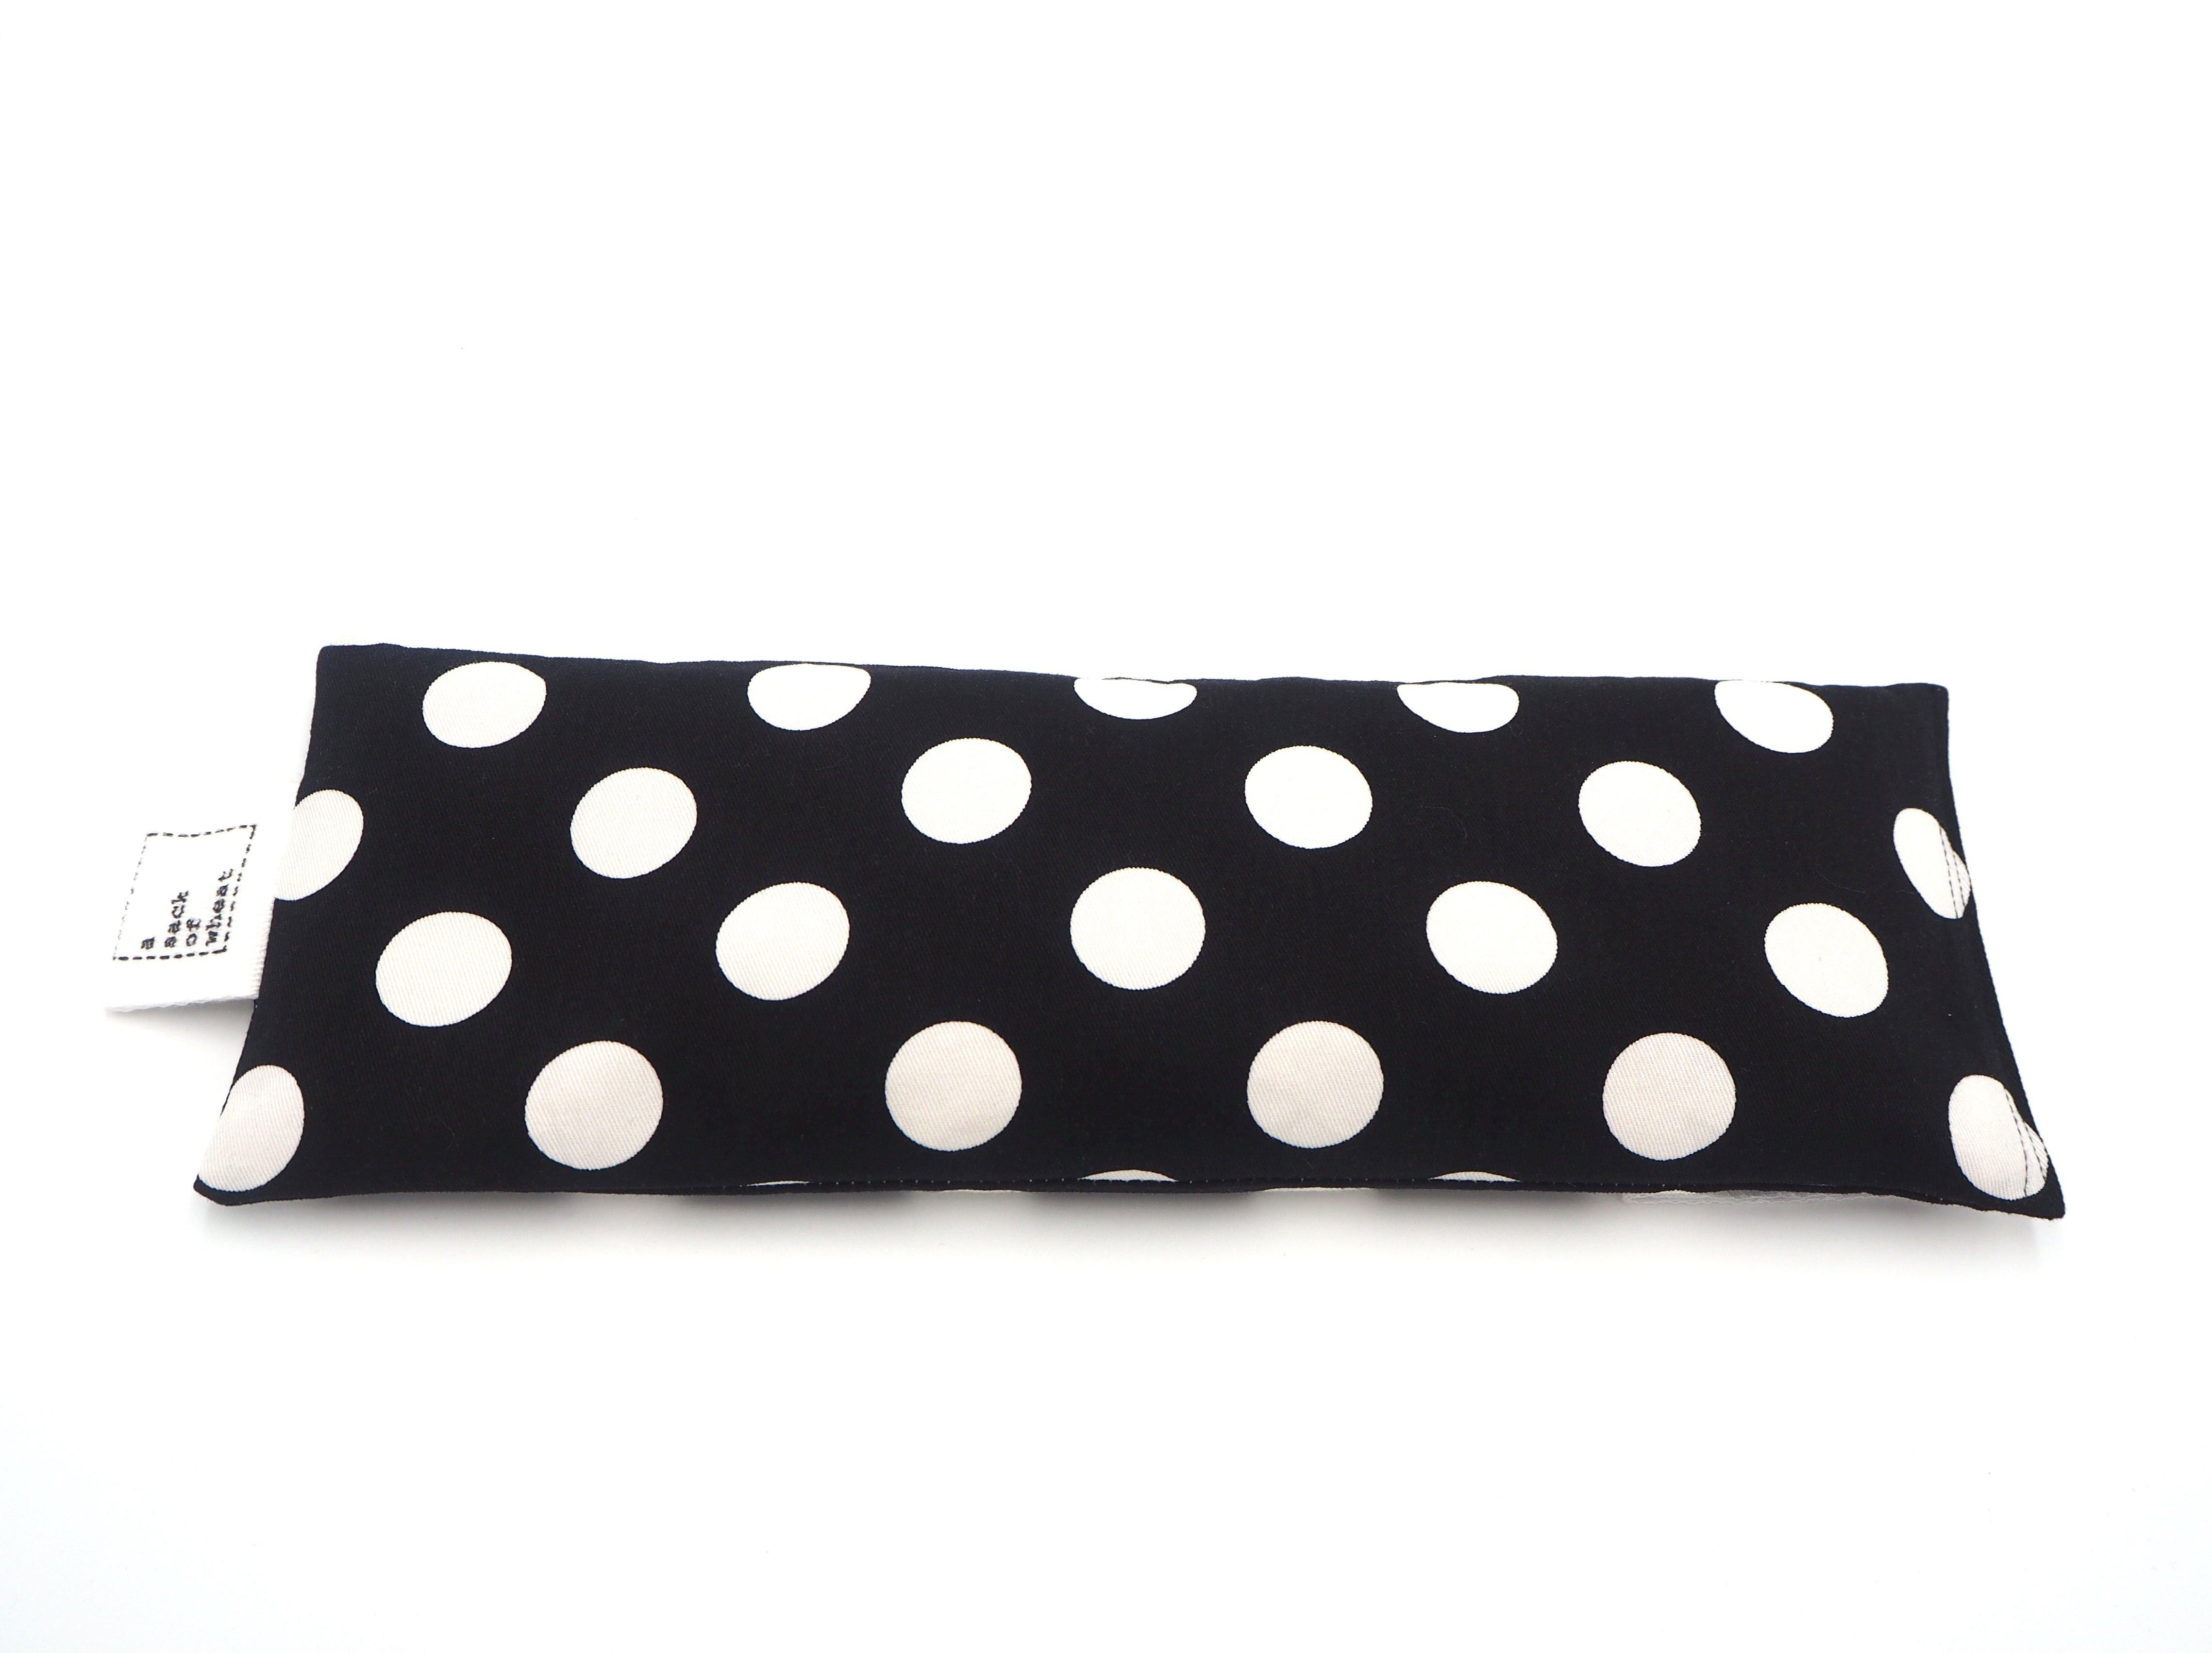 Flat view of A Sack Of Wheat, in a classic Black & White Polka Dot print, 100% cotton fabric